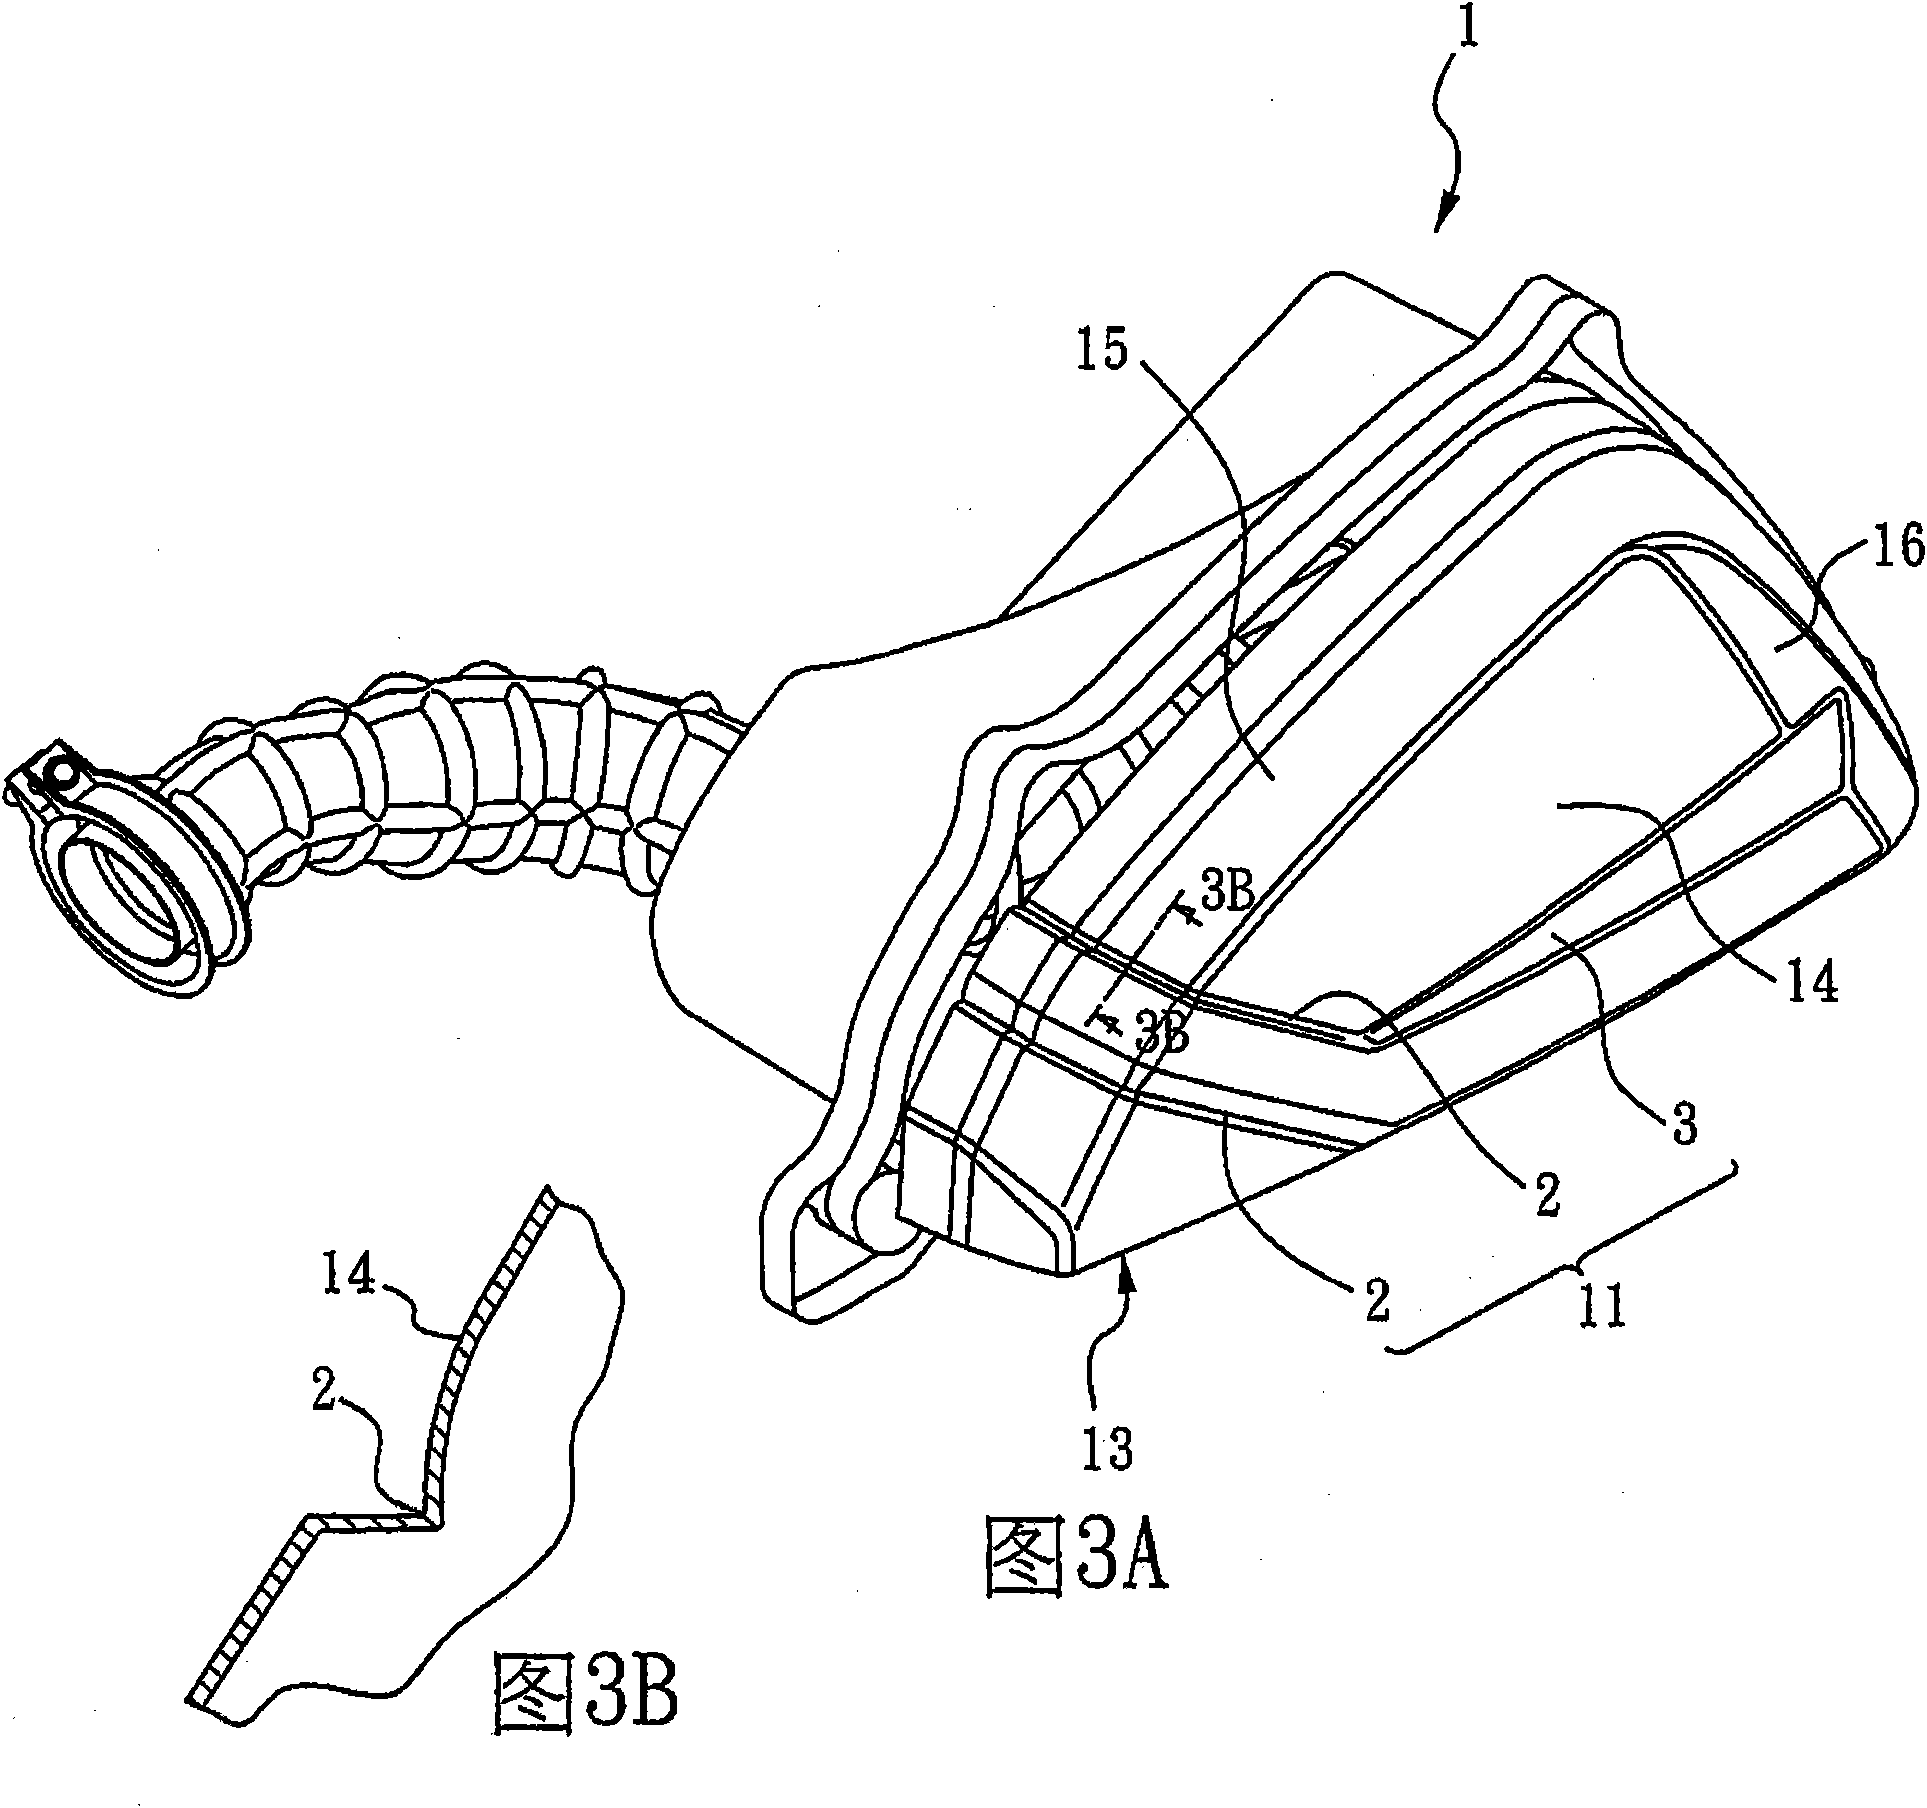 Drain structure of air cleaner for motorcycle